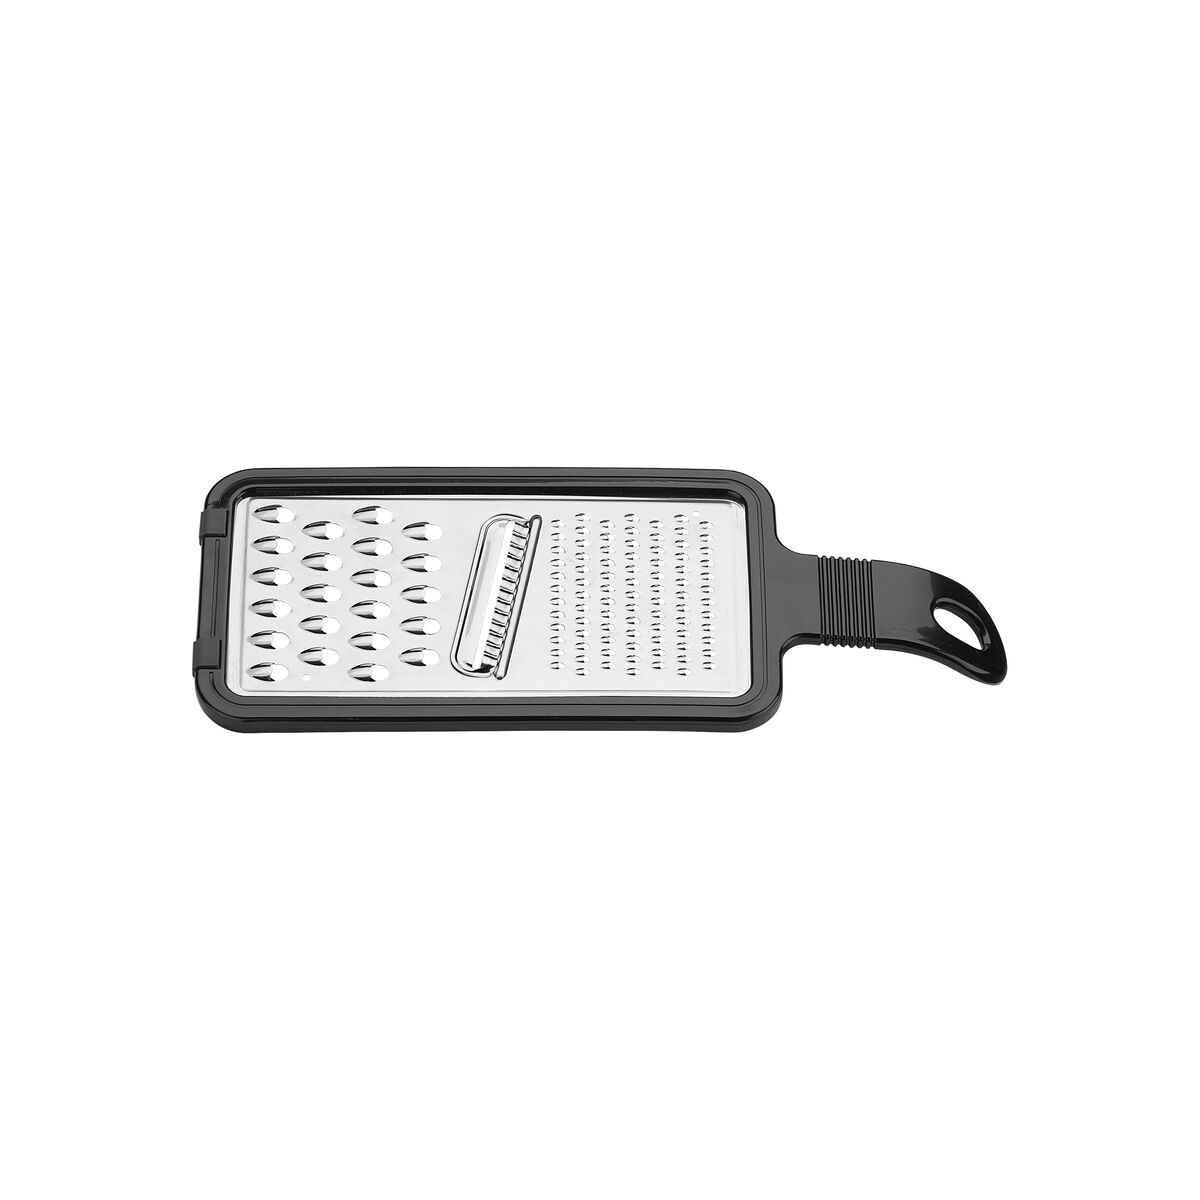 Tramontina Utilitá Universal Grater with Stainless Steel Blade and ABS Handle with Black Rubber Holder